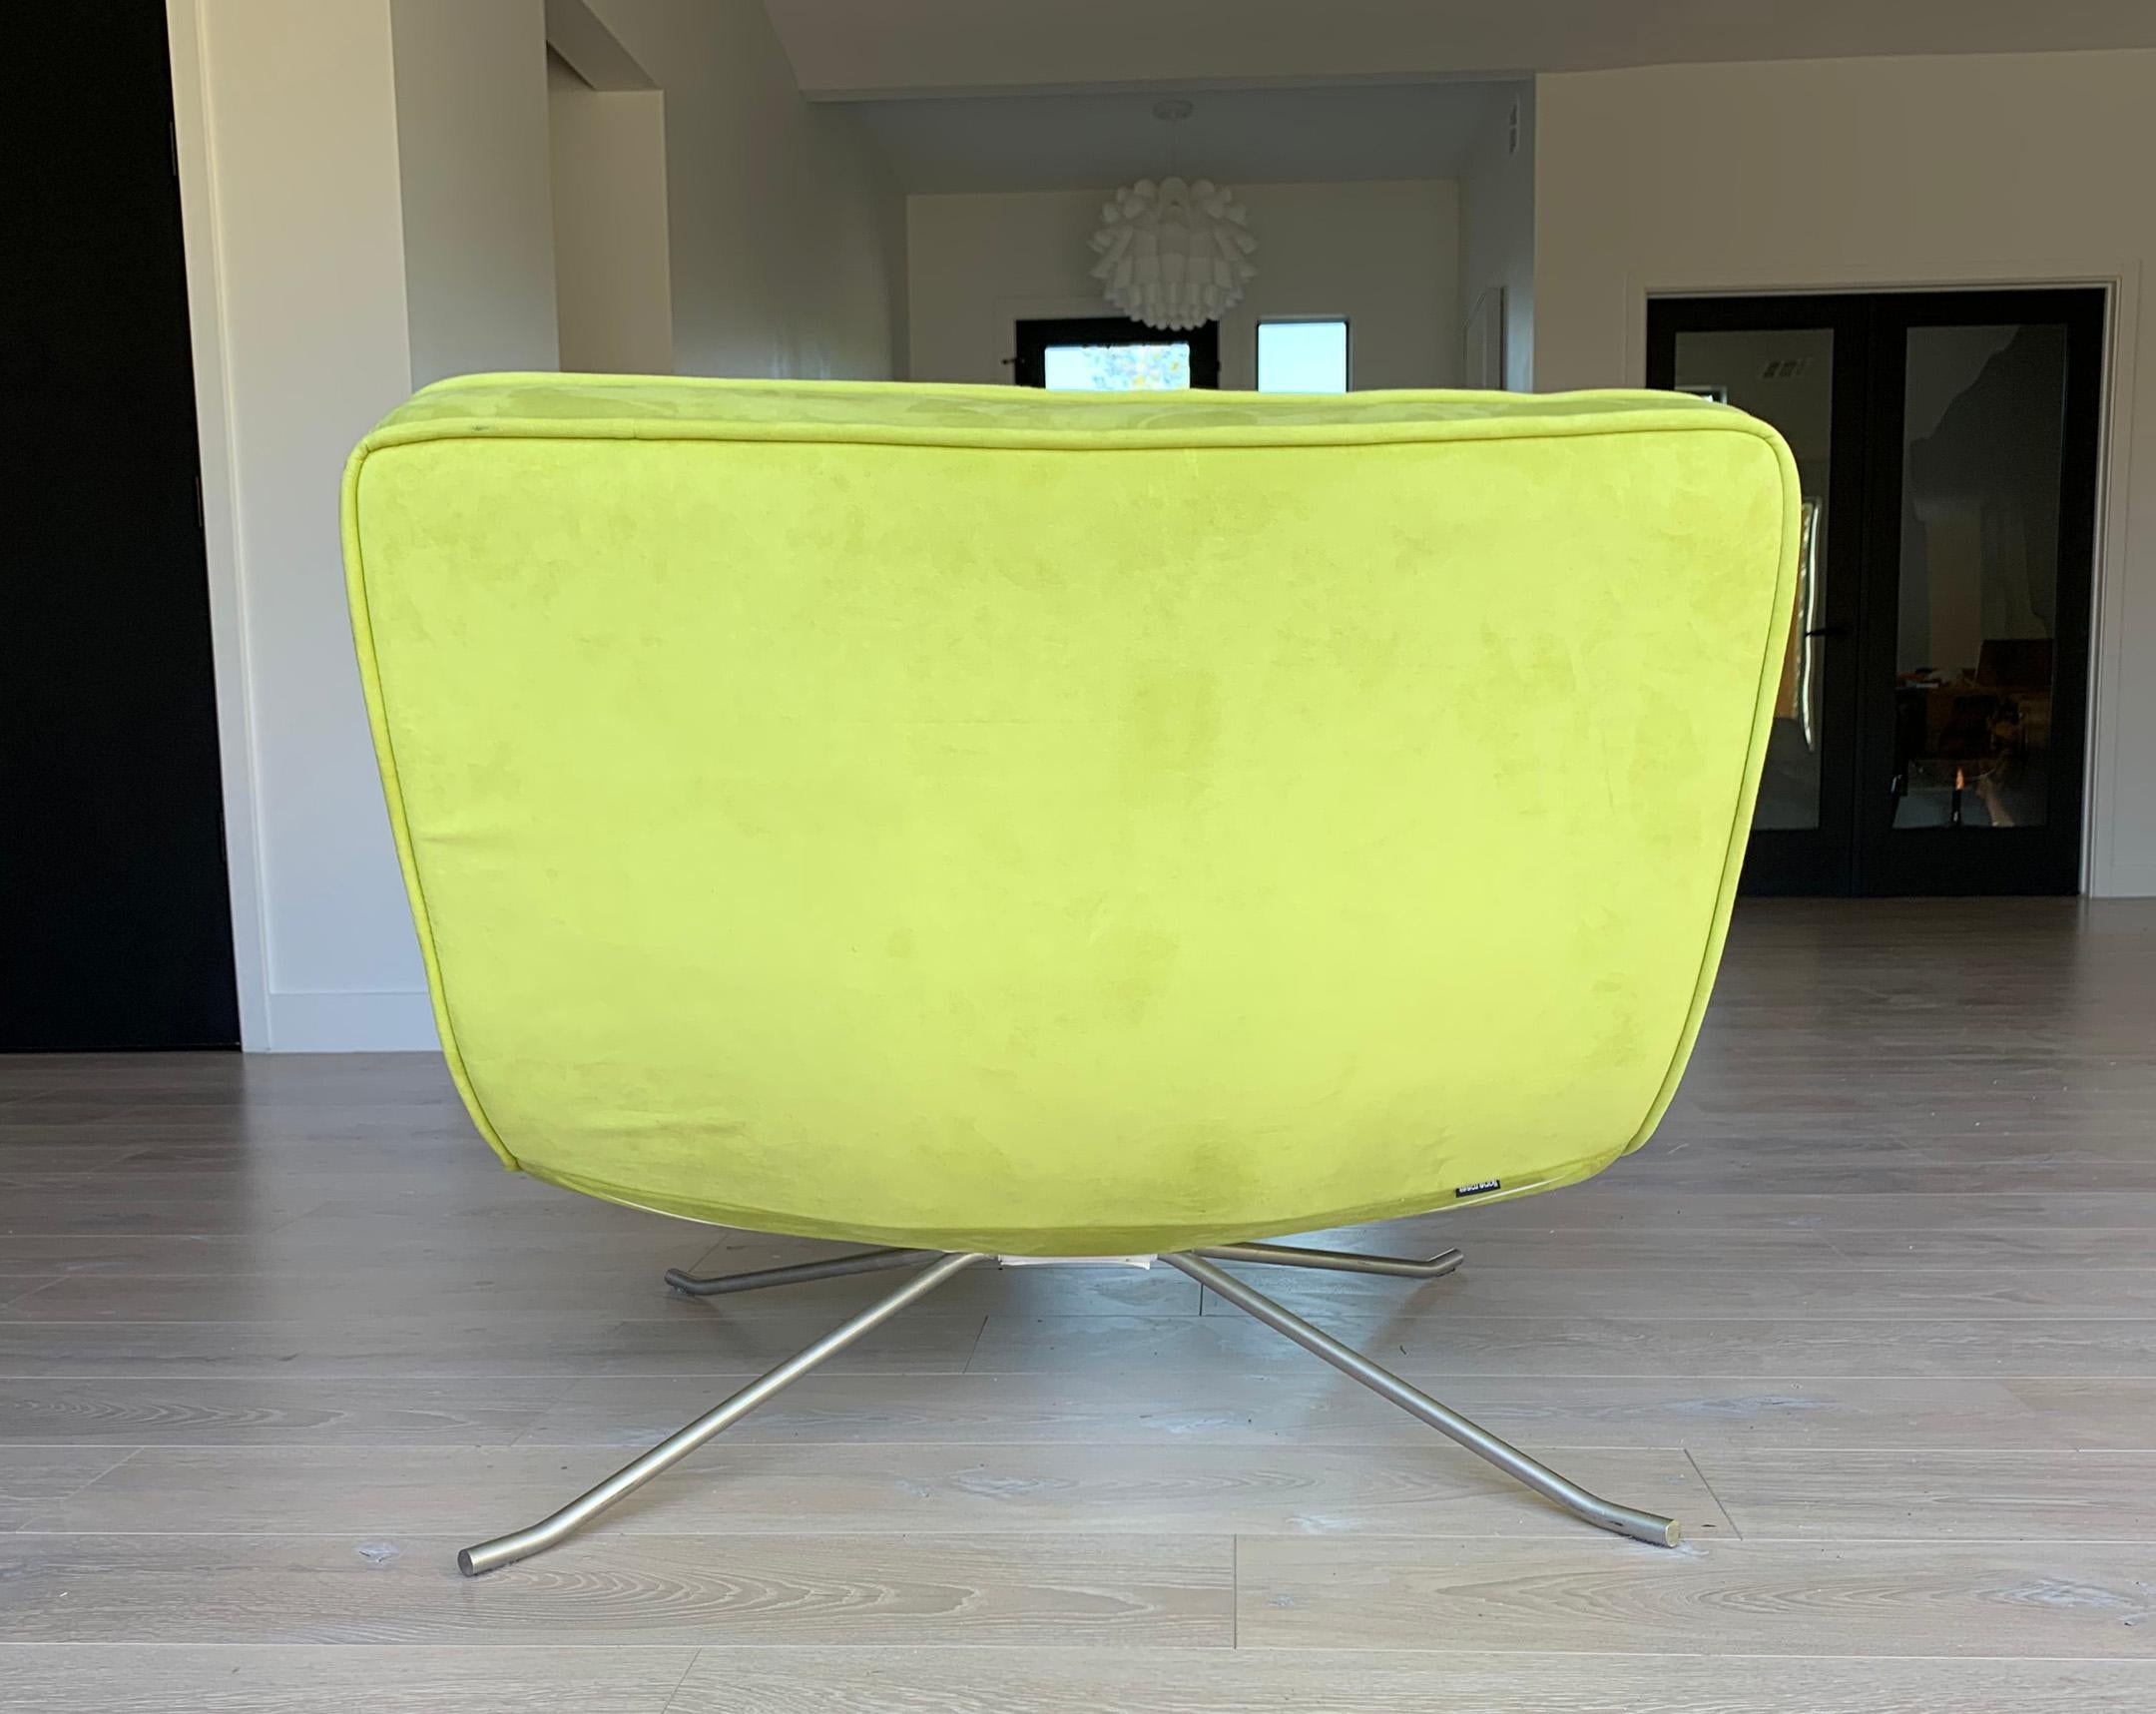 An absolutely stunning chair designed by Christian Werener for Ligne Roset, 2001. This lime green pop chair and ottoman feature curvy, clean lines with a modern feel. This transitional lounge chair would look incredible in almost any environment as